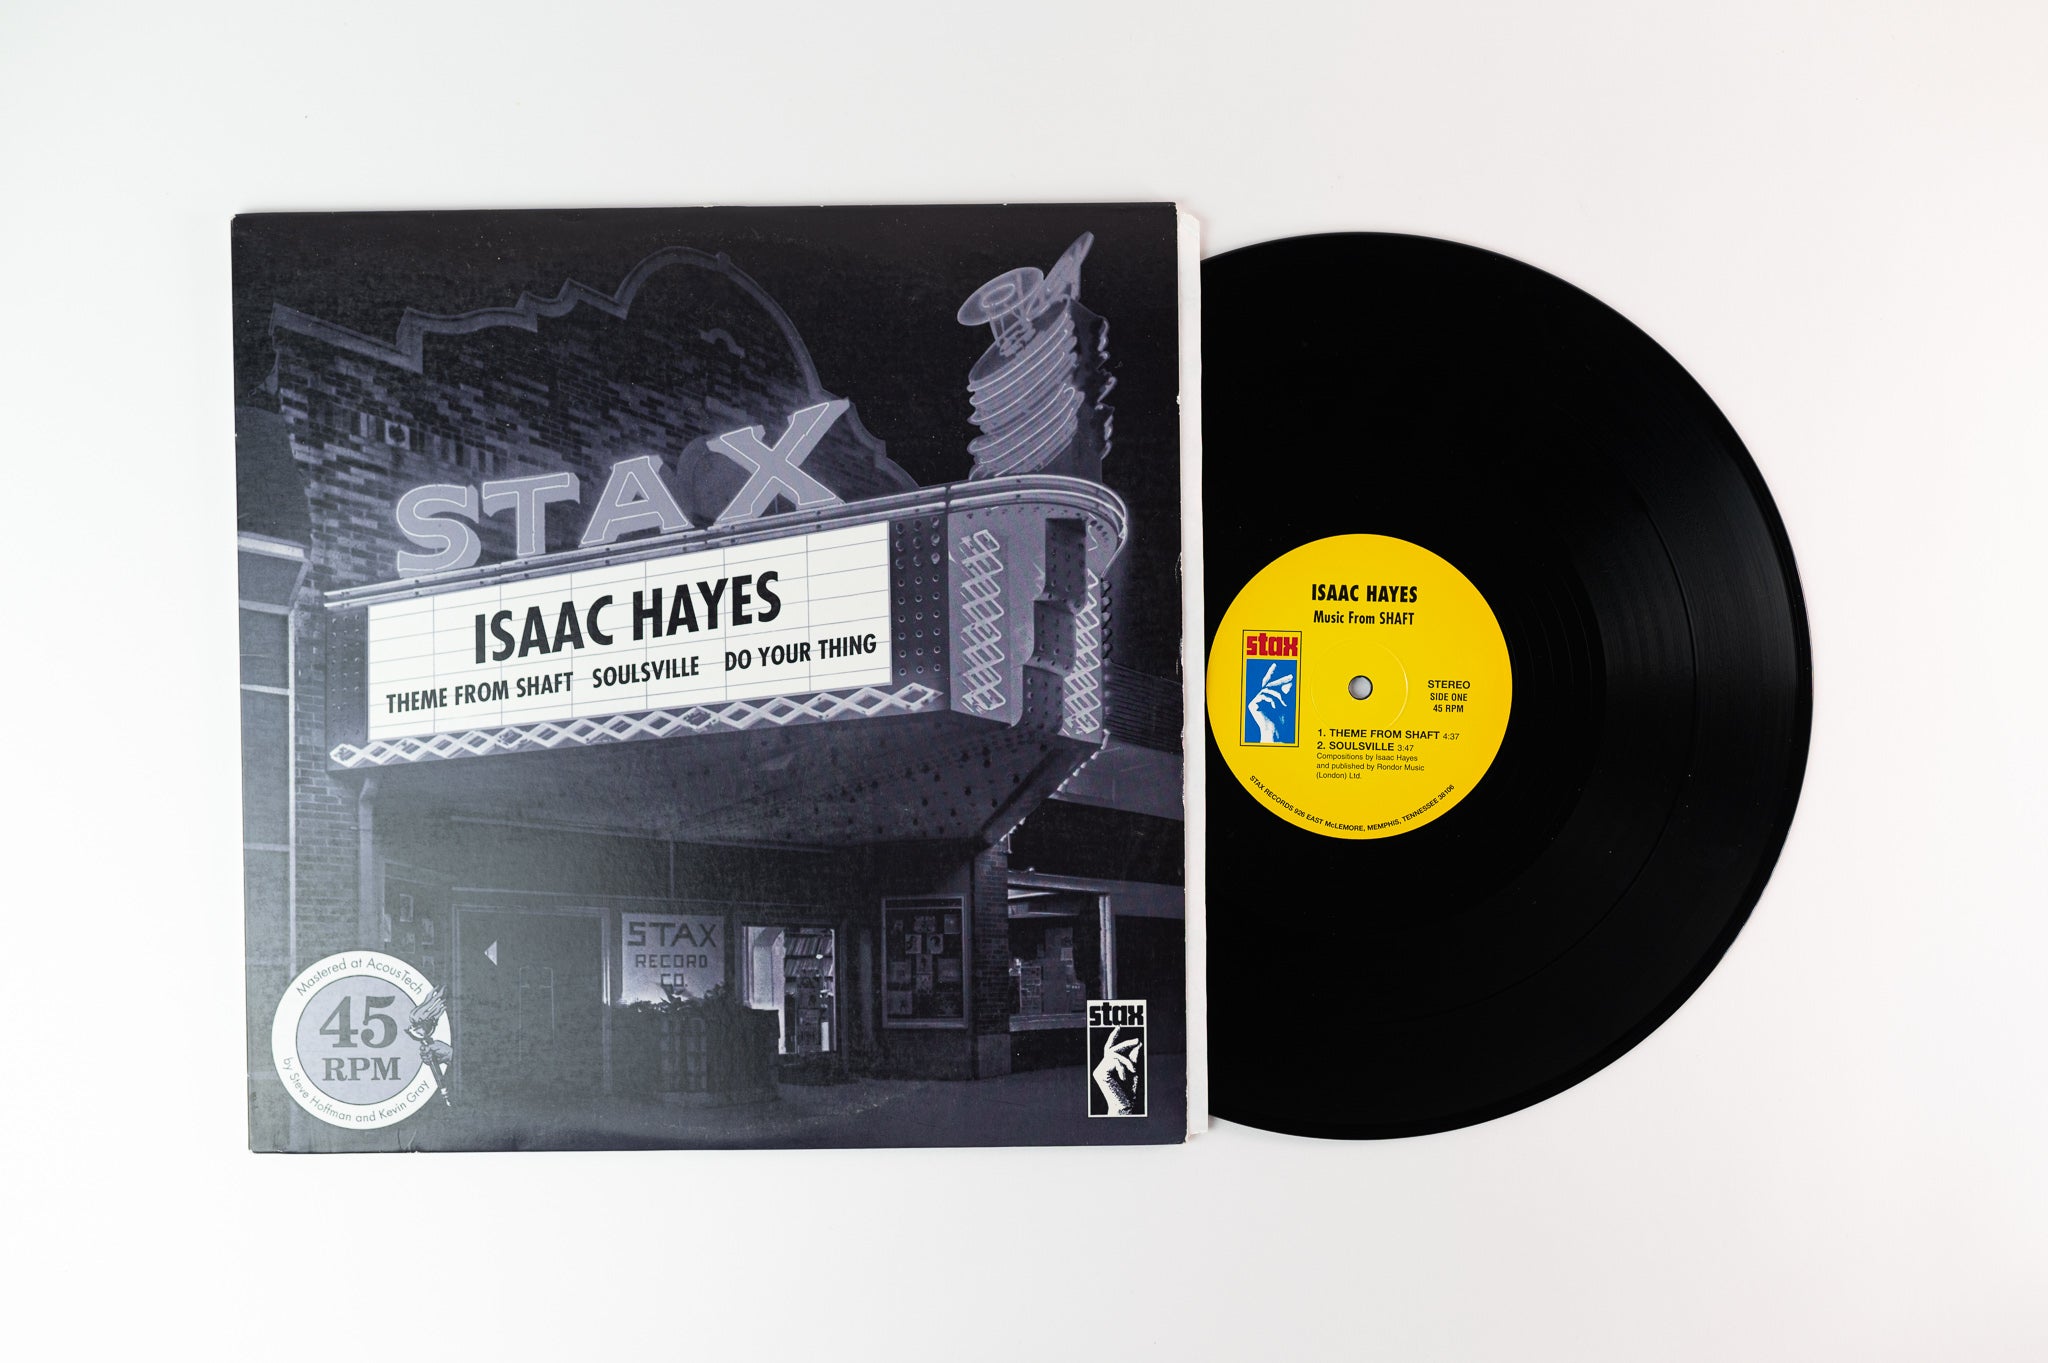 Isaac Hayes - Hits From Shaft on Analogue Productions